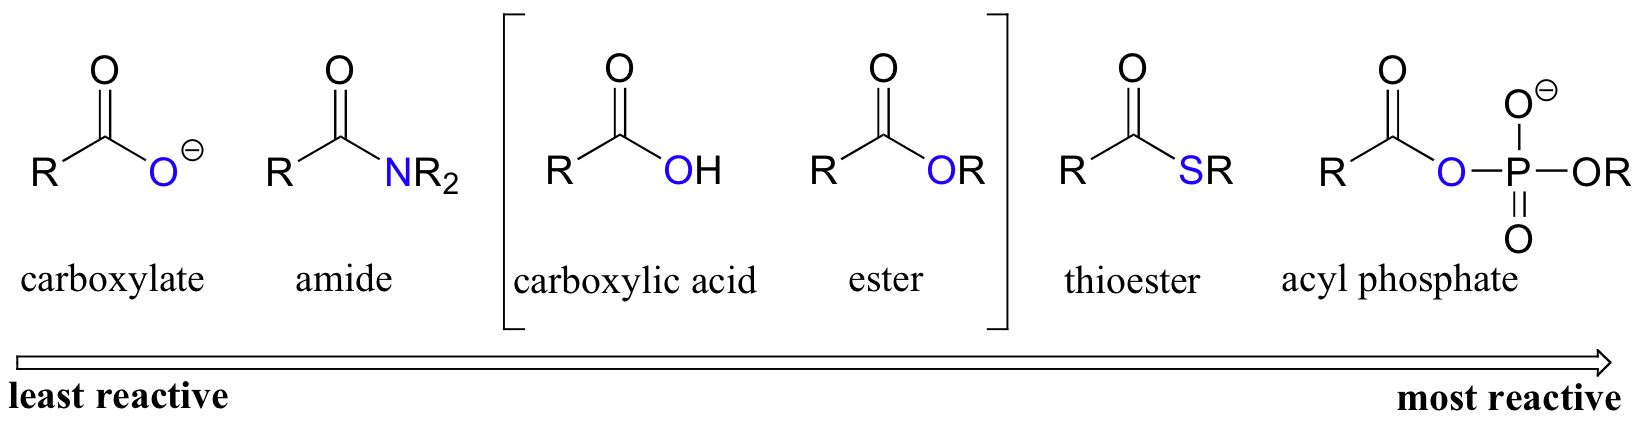 From least to most reactive: carboxylate, amide, carboxylic acid, ester, thioester, and acyl phosphate.